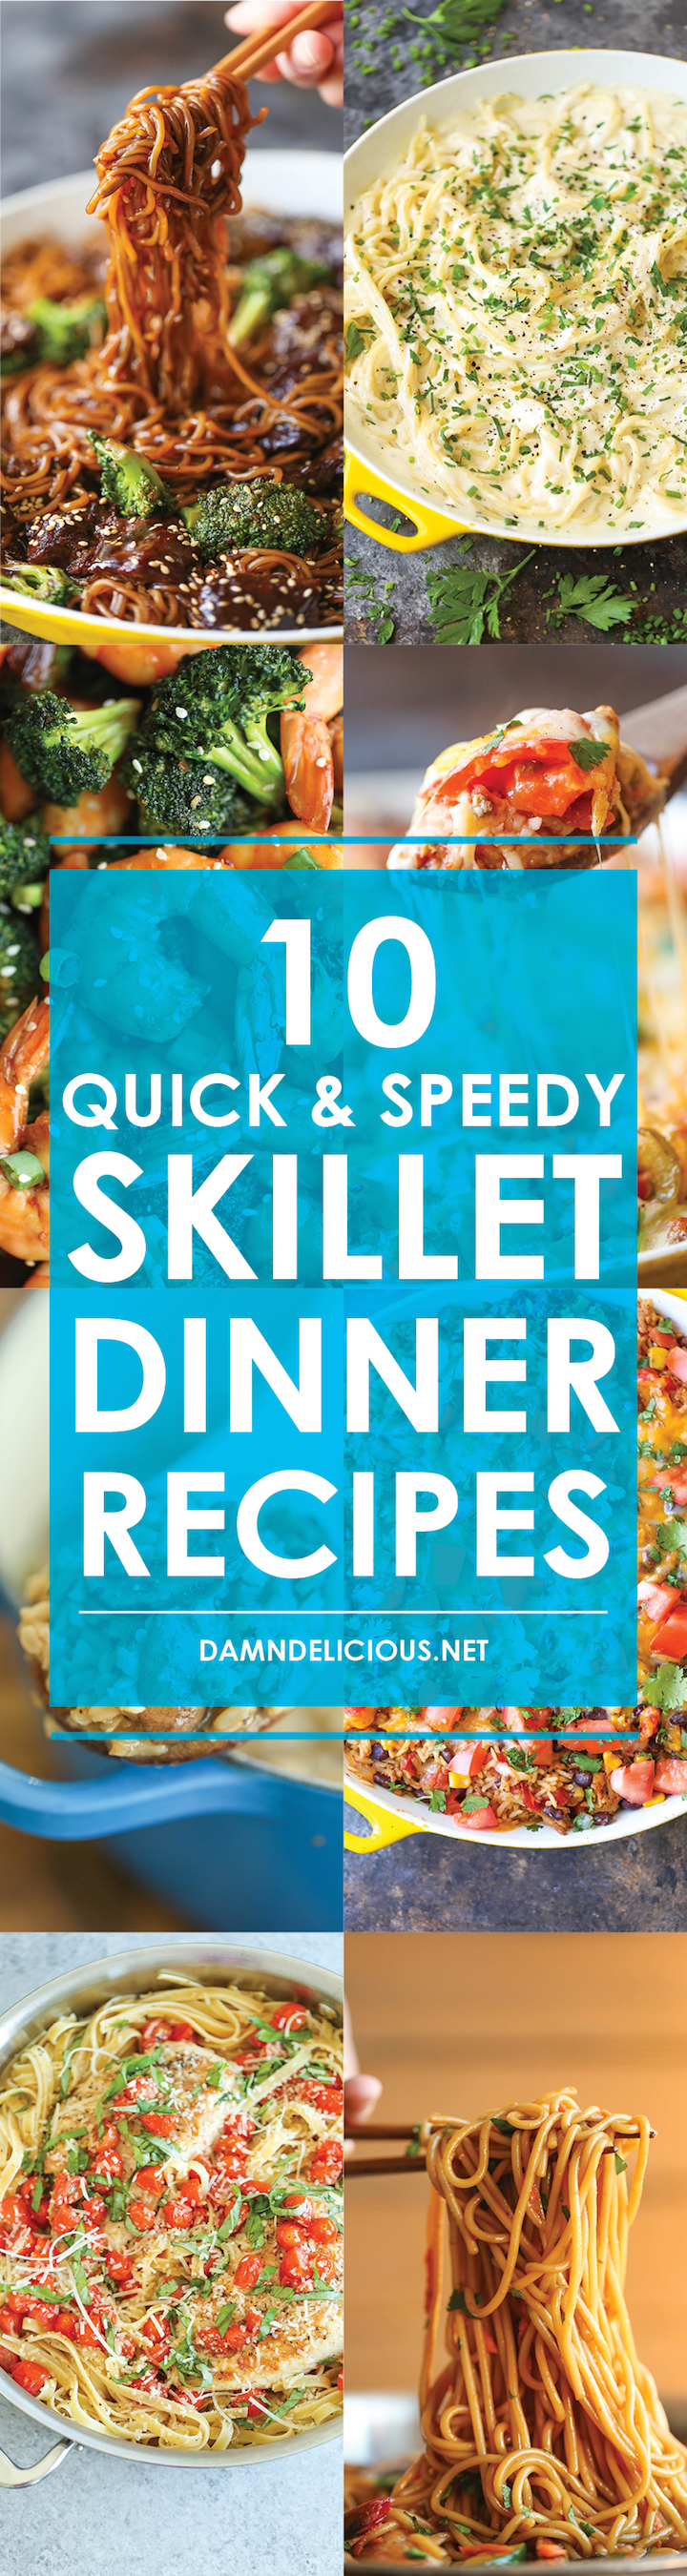 10 Quick and Speedy Skillet Dinners - Easy peasy 30-minute dinners made in a flash for those busy weeknights. Best of all, there's minimal clean up here!